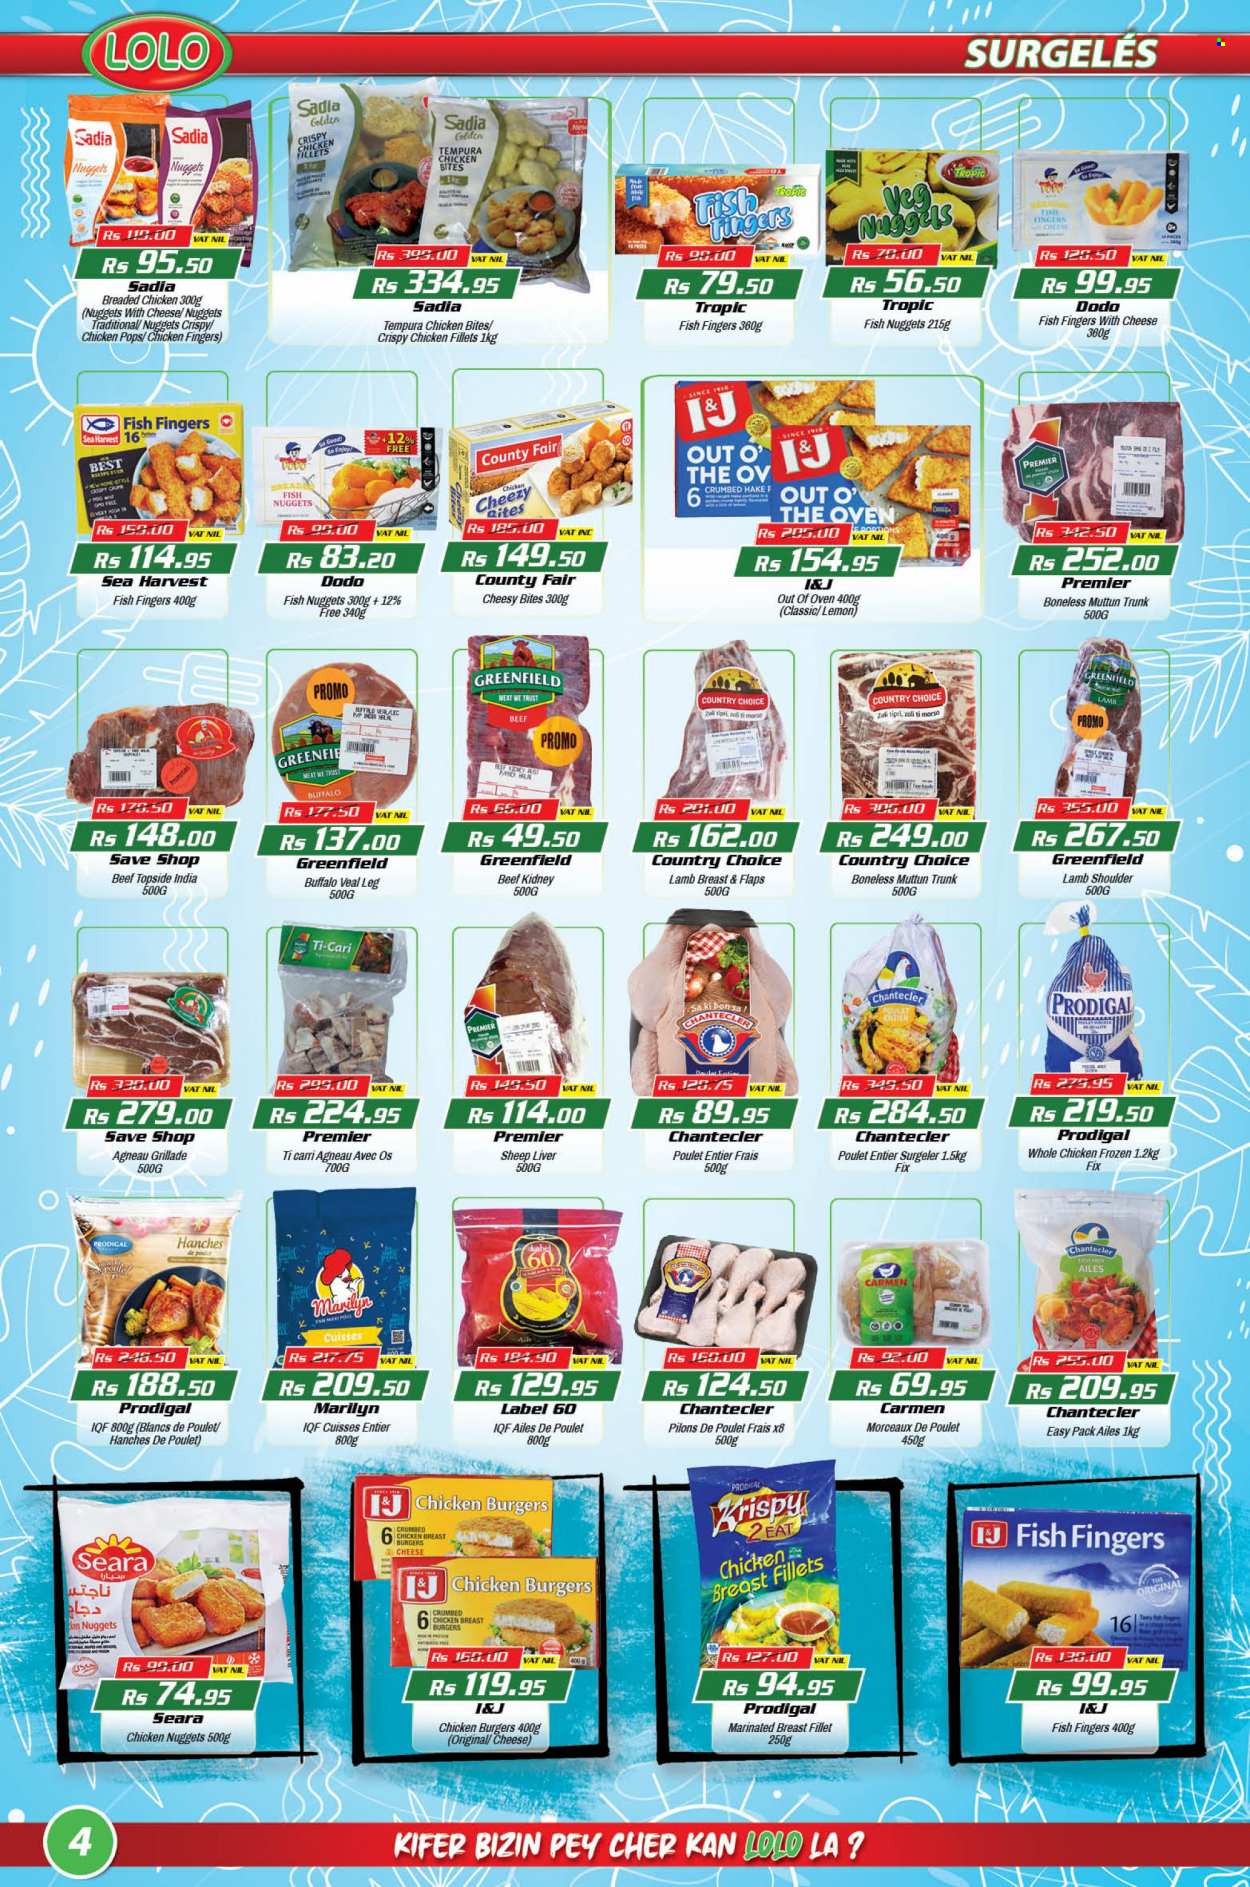 thumbnail - LOLO Hyper Catalogue - 26.08.2022 - 15.09.2022 - Sales products - bread, hake, fish, fish nuggets, fish fingers, Sea Harvest, fish sticks, hamburger, fried chicken, chicken nuggets, Out o' the Oven, cheese, chicken bites, whole chicken, chicken, beef kidney, lamb meat, lamb shoulder, Trust. Page 4.